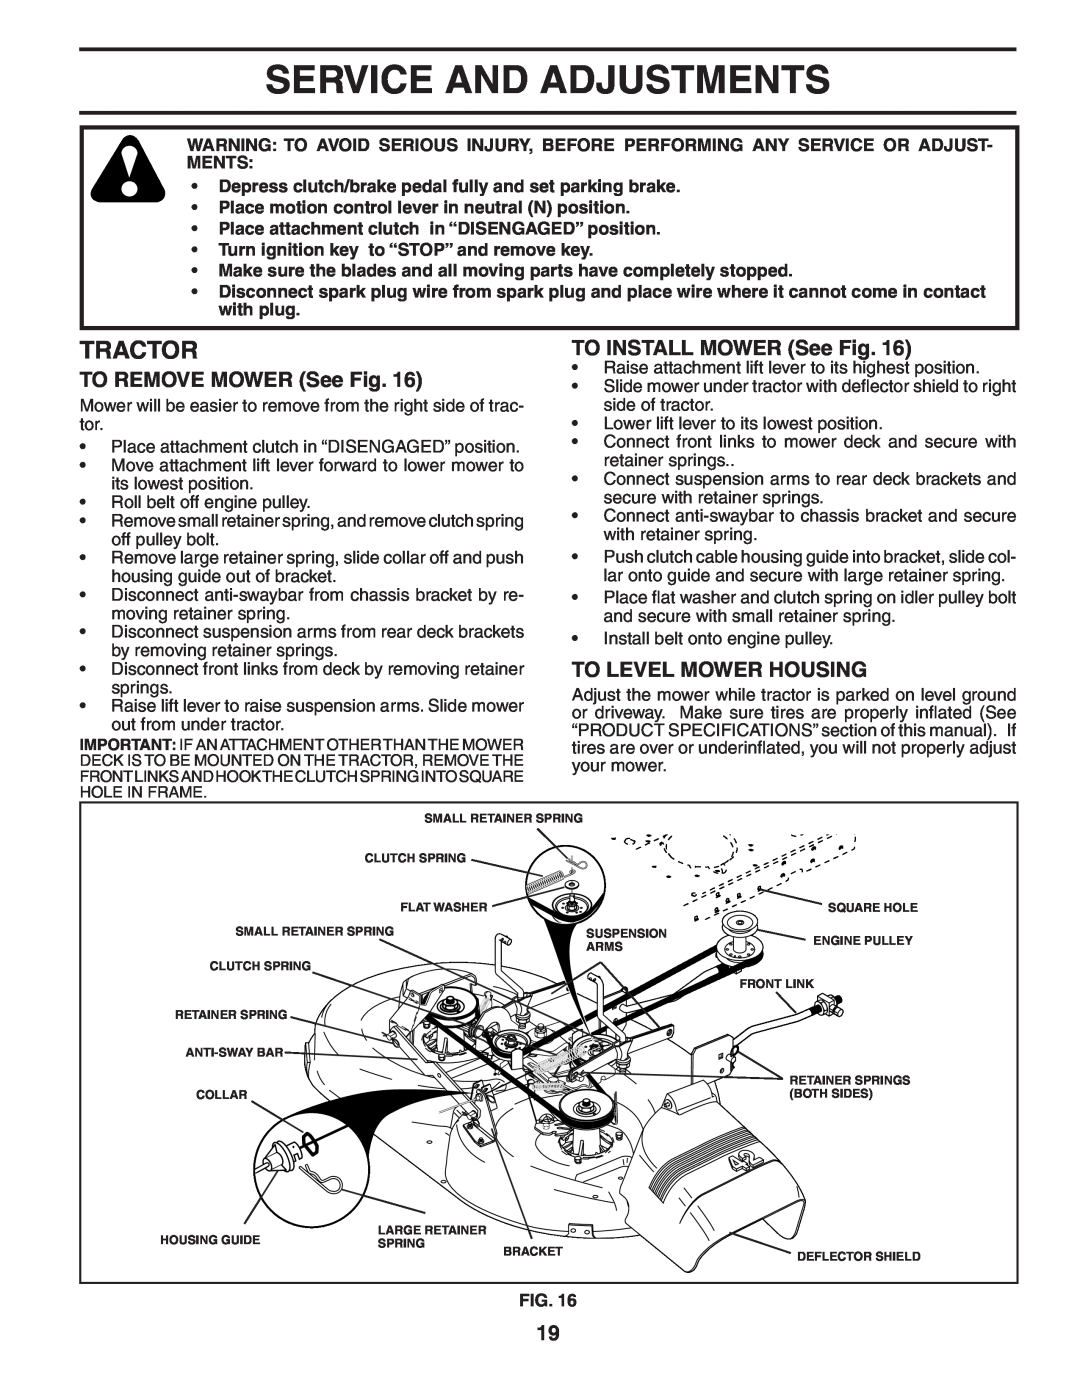 Husqvarna LTH1742 Service And Adjustments, TO REMOVE MOWER See Fig, TO INSTALL MOWER See Fig, To Level Mower Housing 